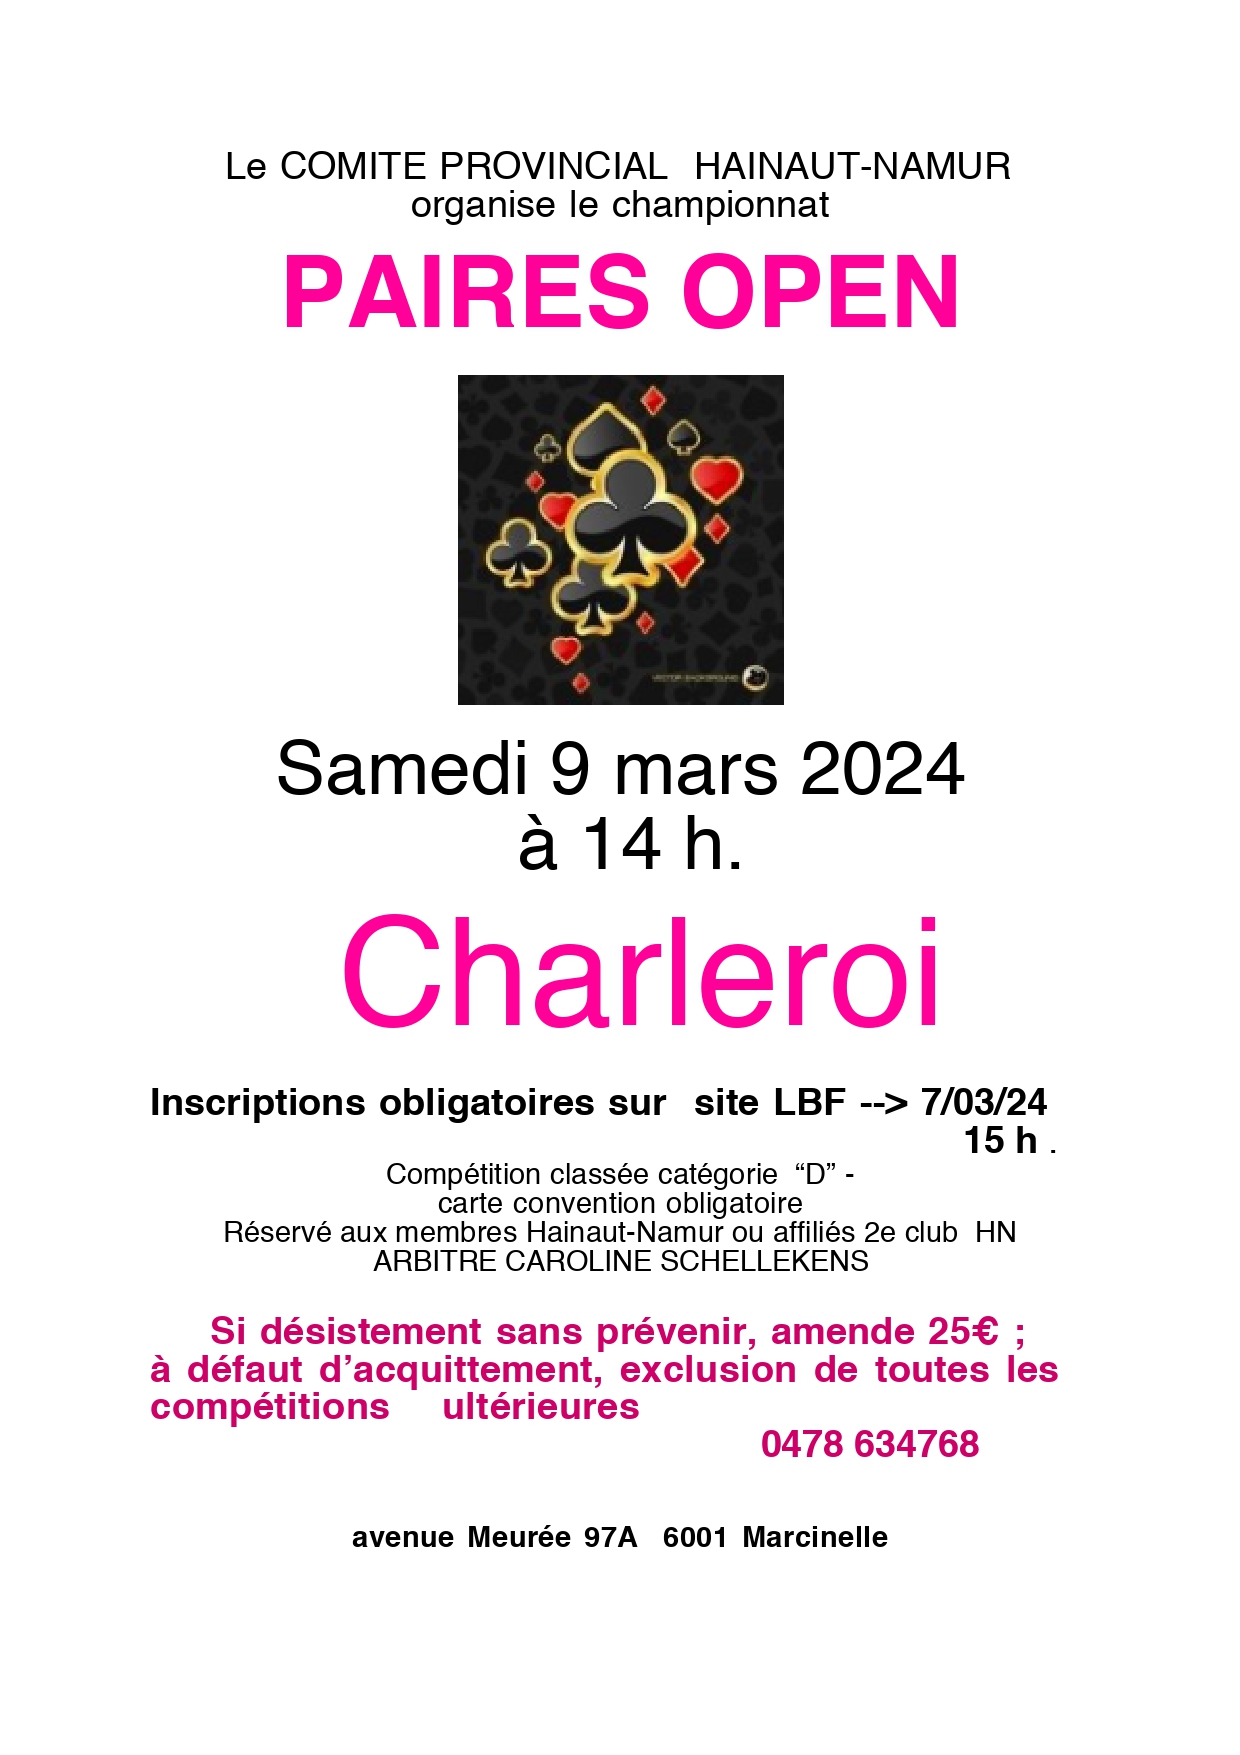 paires-open-2024-hn.cwk_page-0001.jpg